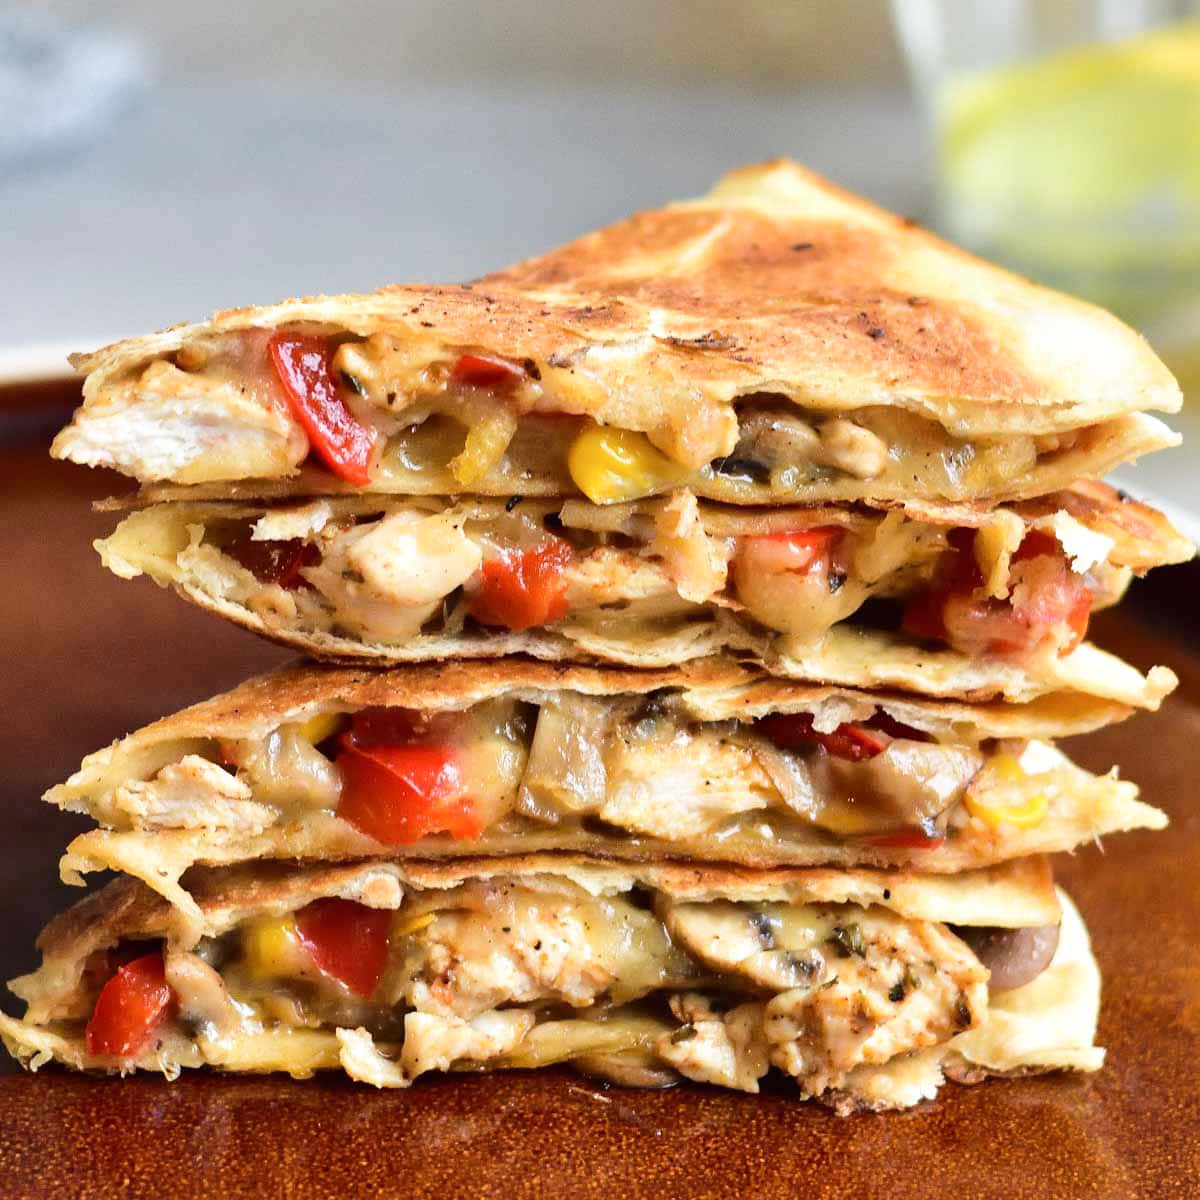 Chicken quesadillas on a brown plate.